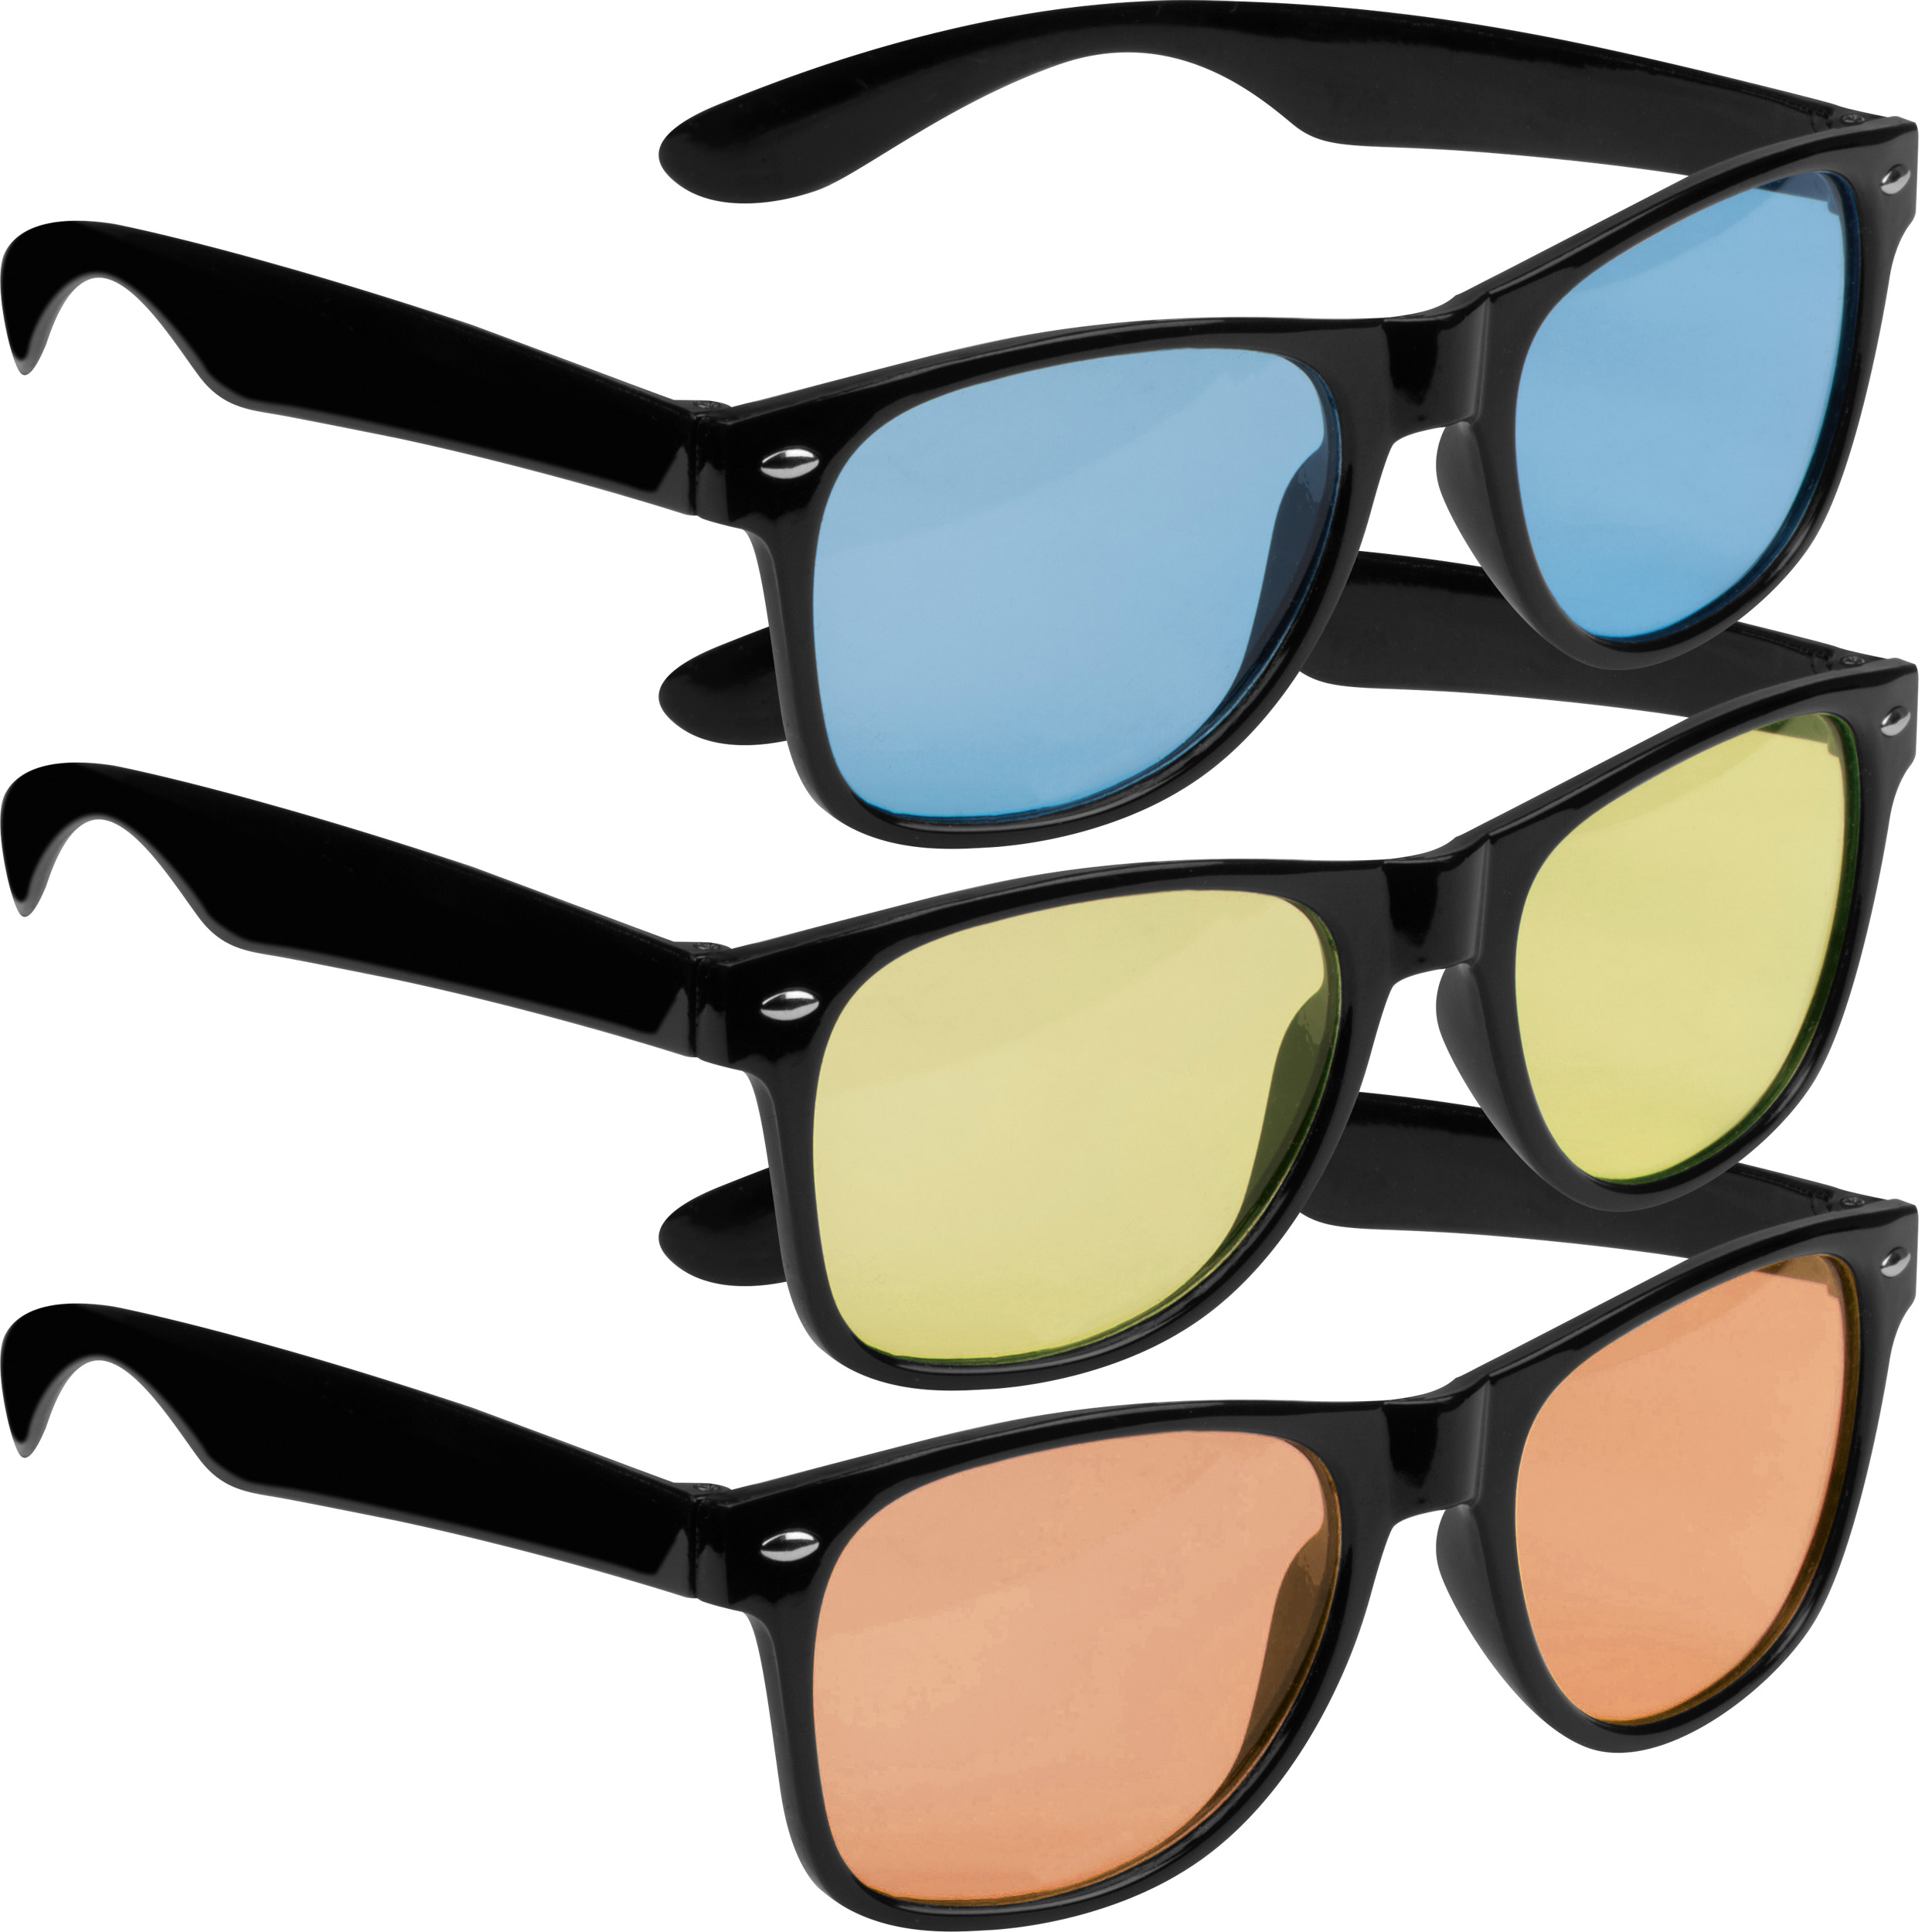 Sunglasses with colored glasses